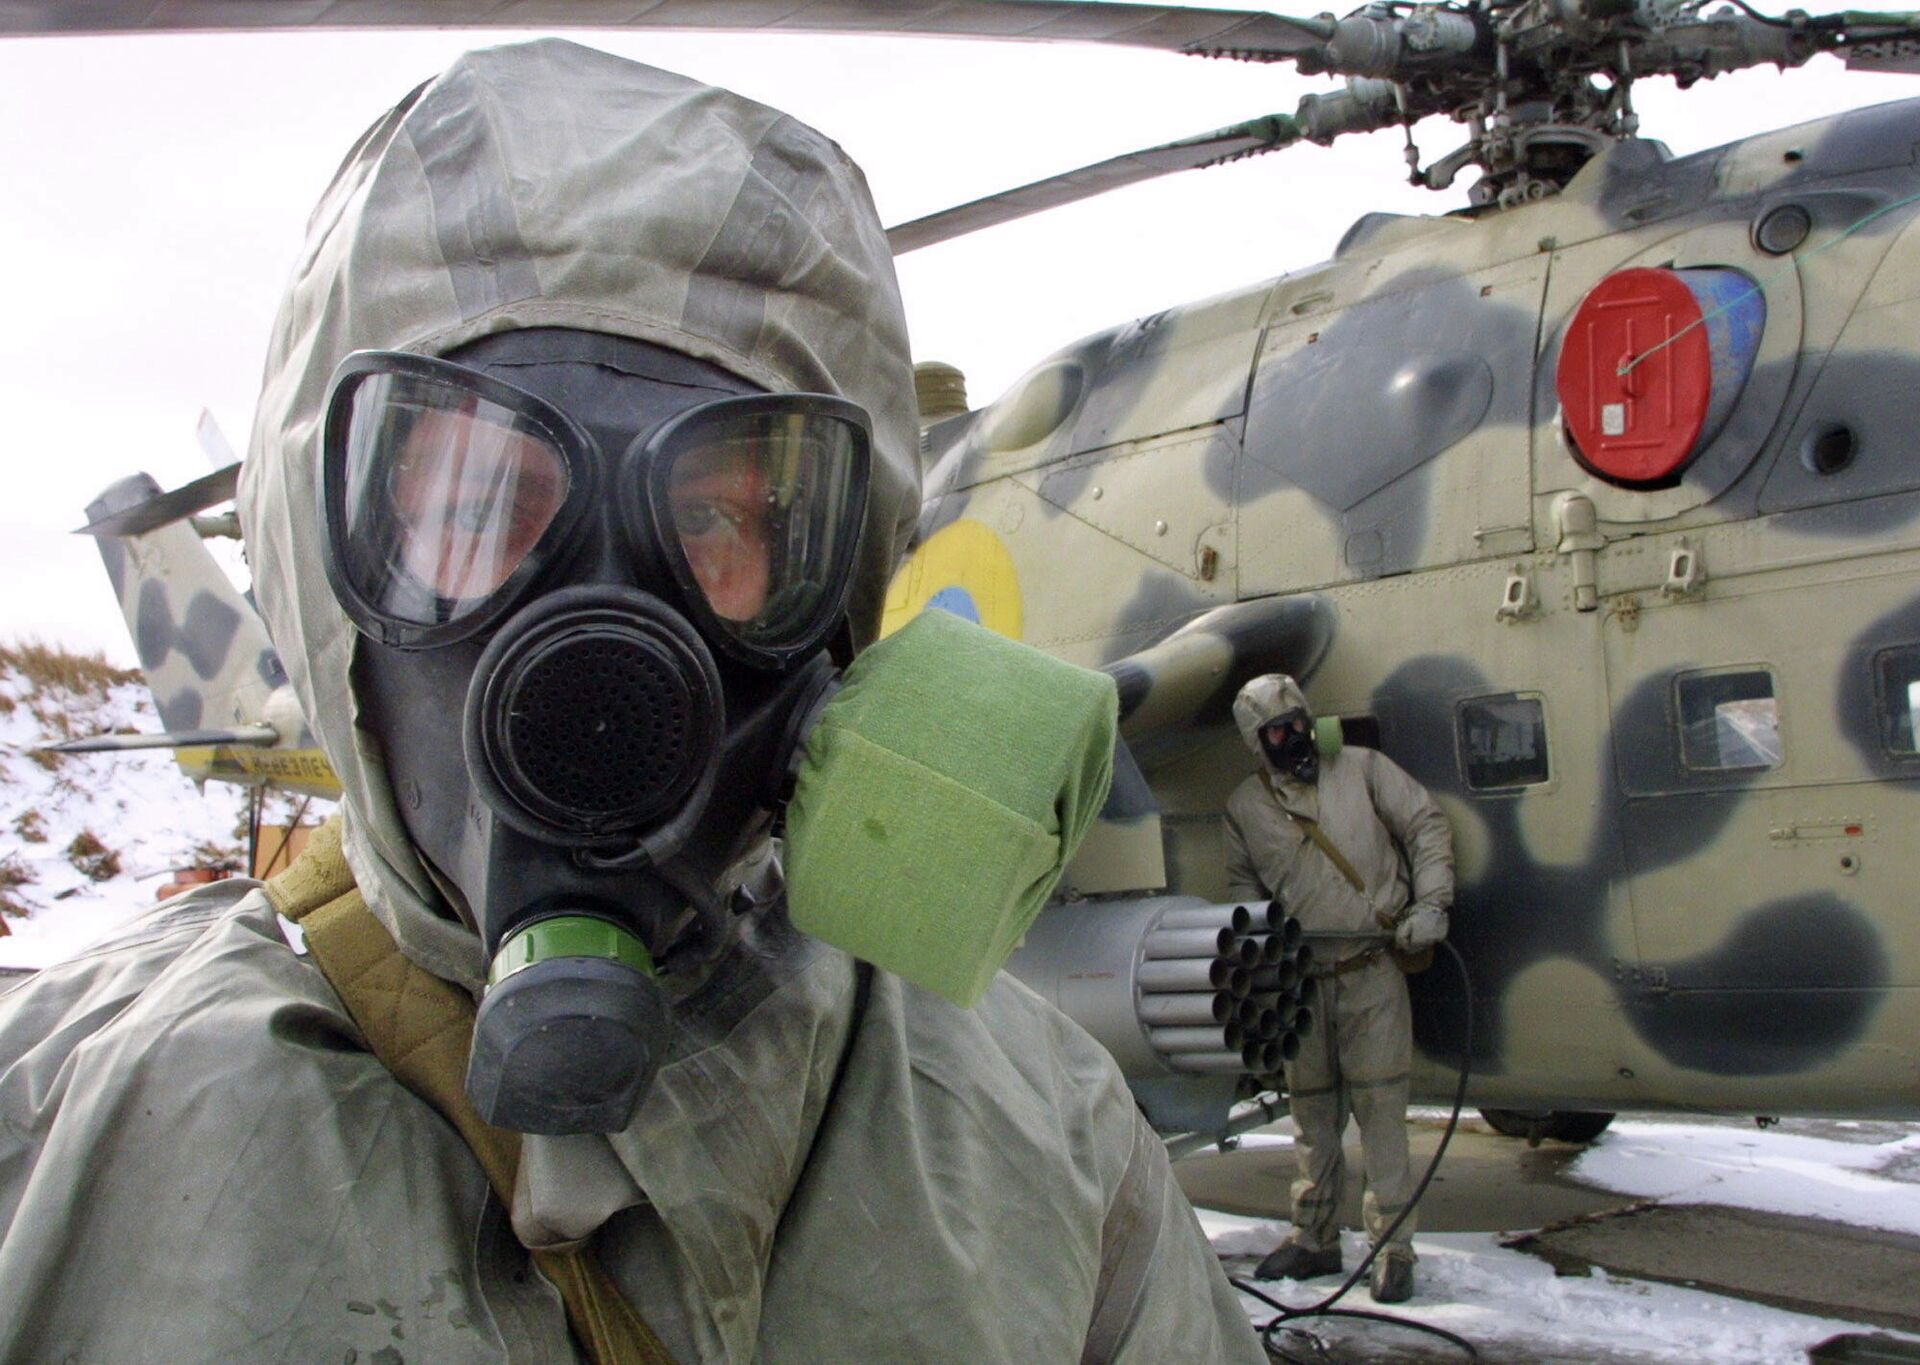 Ukrainian soldier wears a protective suit and a gas mask during exercises of Ukrainian anti-chemical weapons forces in Kalyniv, 620 kilometers (390 miles) west of Kiev, Ukraine,  Friday, March 14, 2003 - Sputnik International, 1920, 25.08.2022